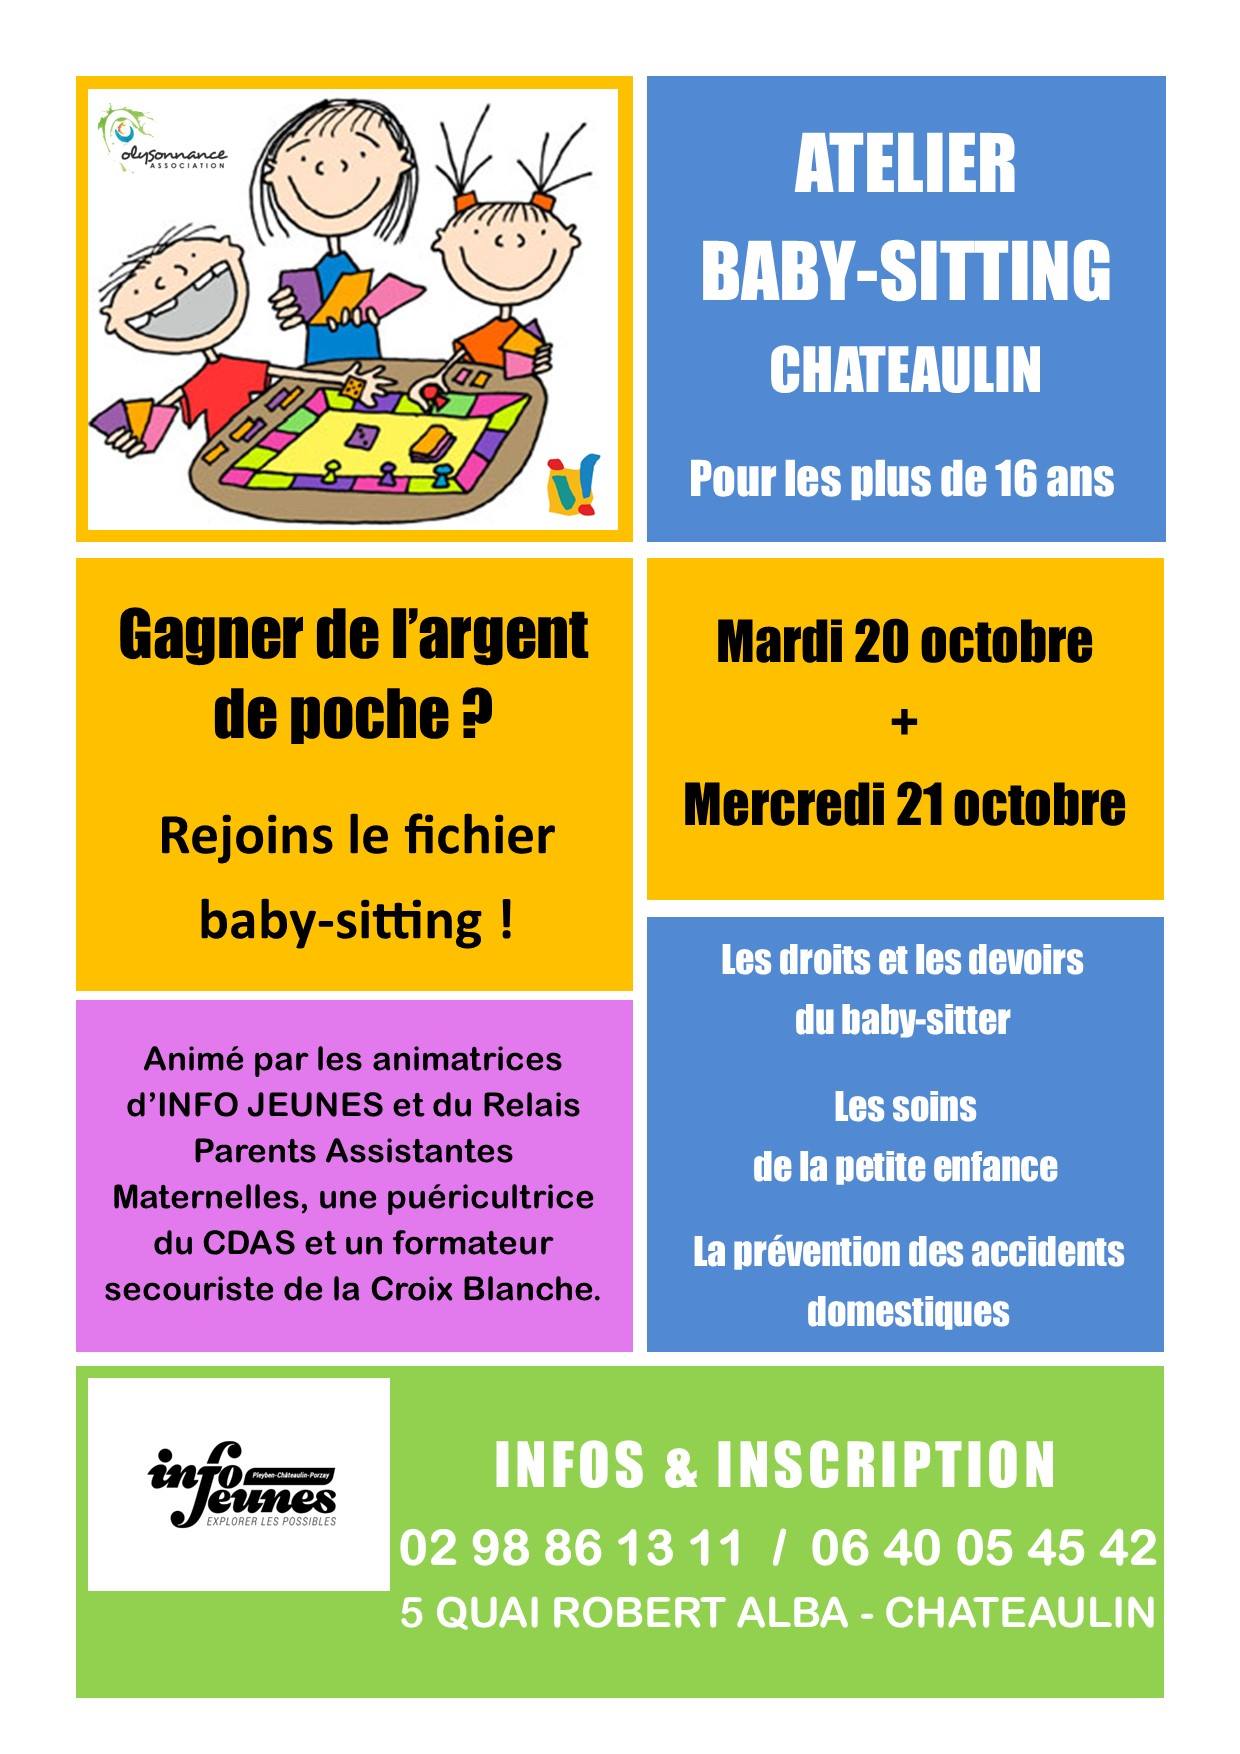 Atelier Baby-Sitting Châteaulin